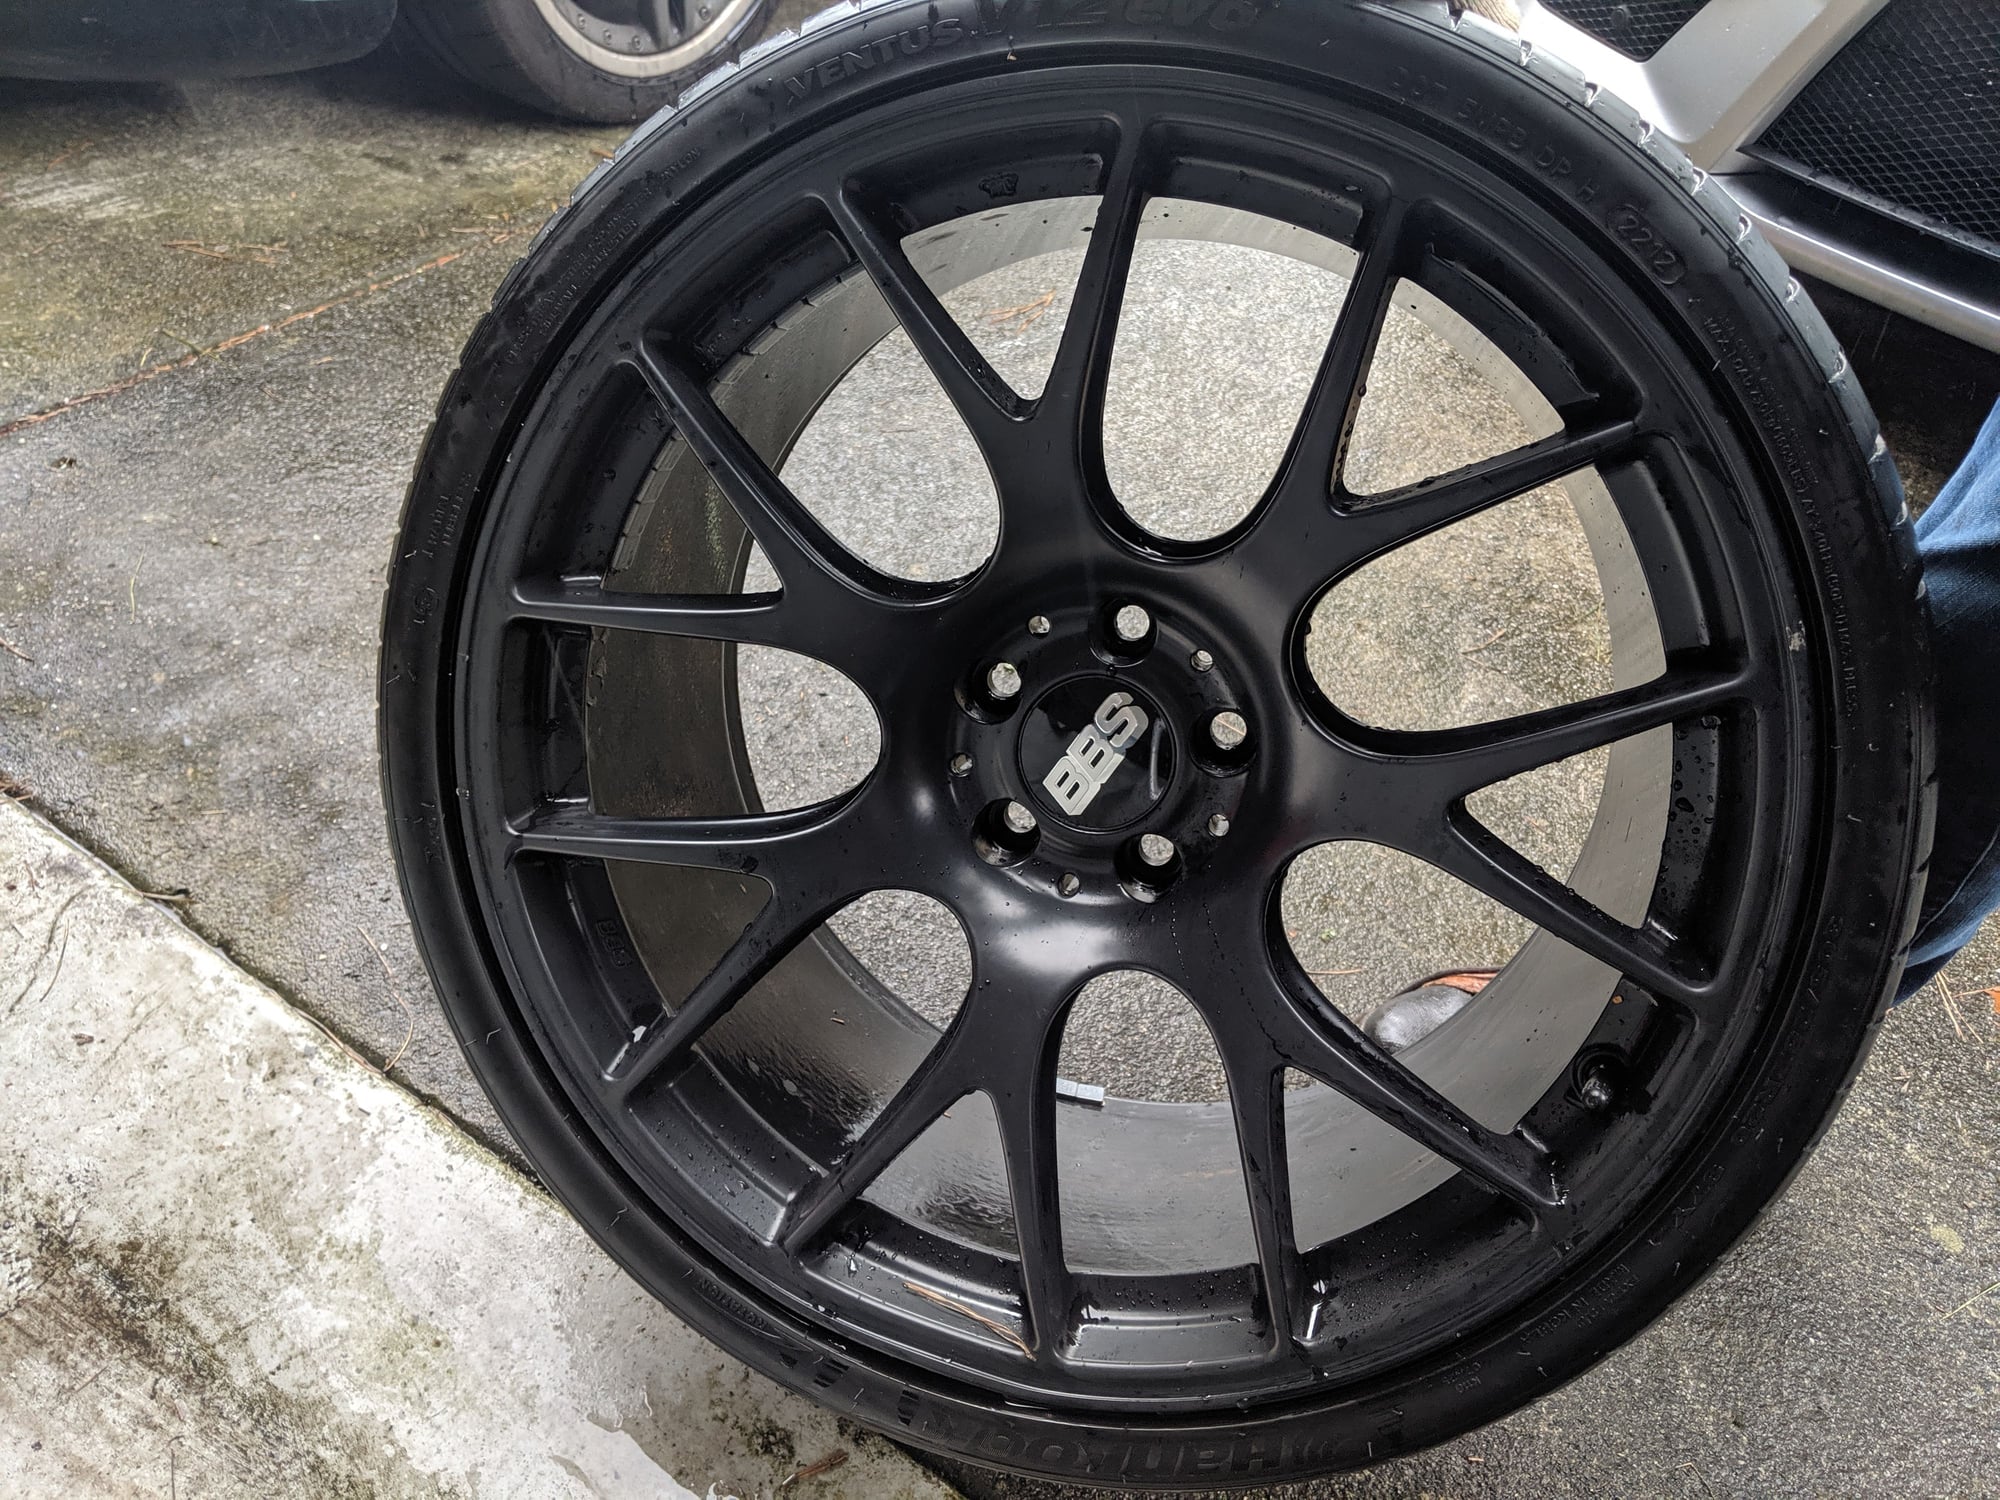 Wheels and Tires/Axles - 20" Black BBS CH R230 SL fitment wheels - SL55/SL65 (CLS) - Used - All Years Mercedes-Benz SL55 AMG - 2005 to 2011 Mercedes-Benz SL65 AMG - All Years Mercedes-Benz SL500 - All Years Mercedes-Benz SL600 - 2009 to 2011 Mercedes-Benz SL63 AMG - San Francisco, CA 94116, United States